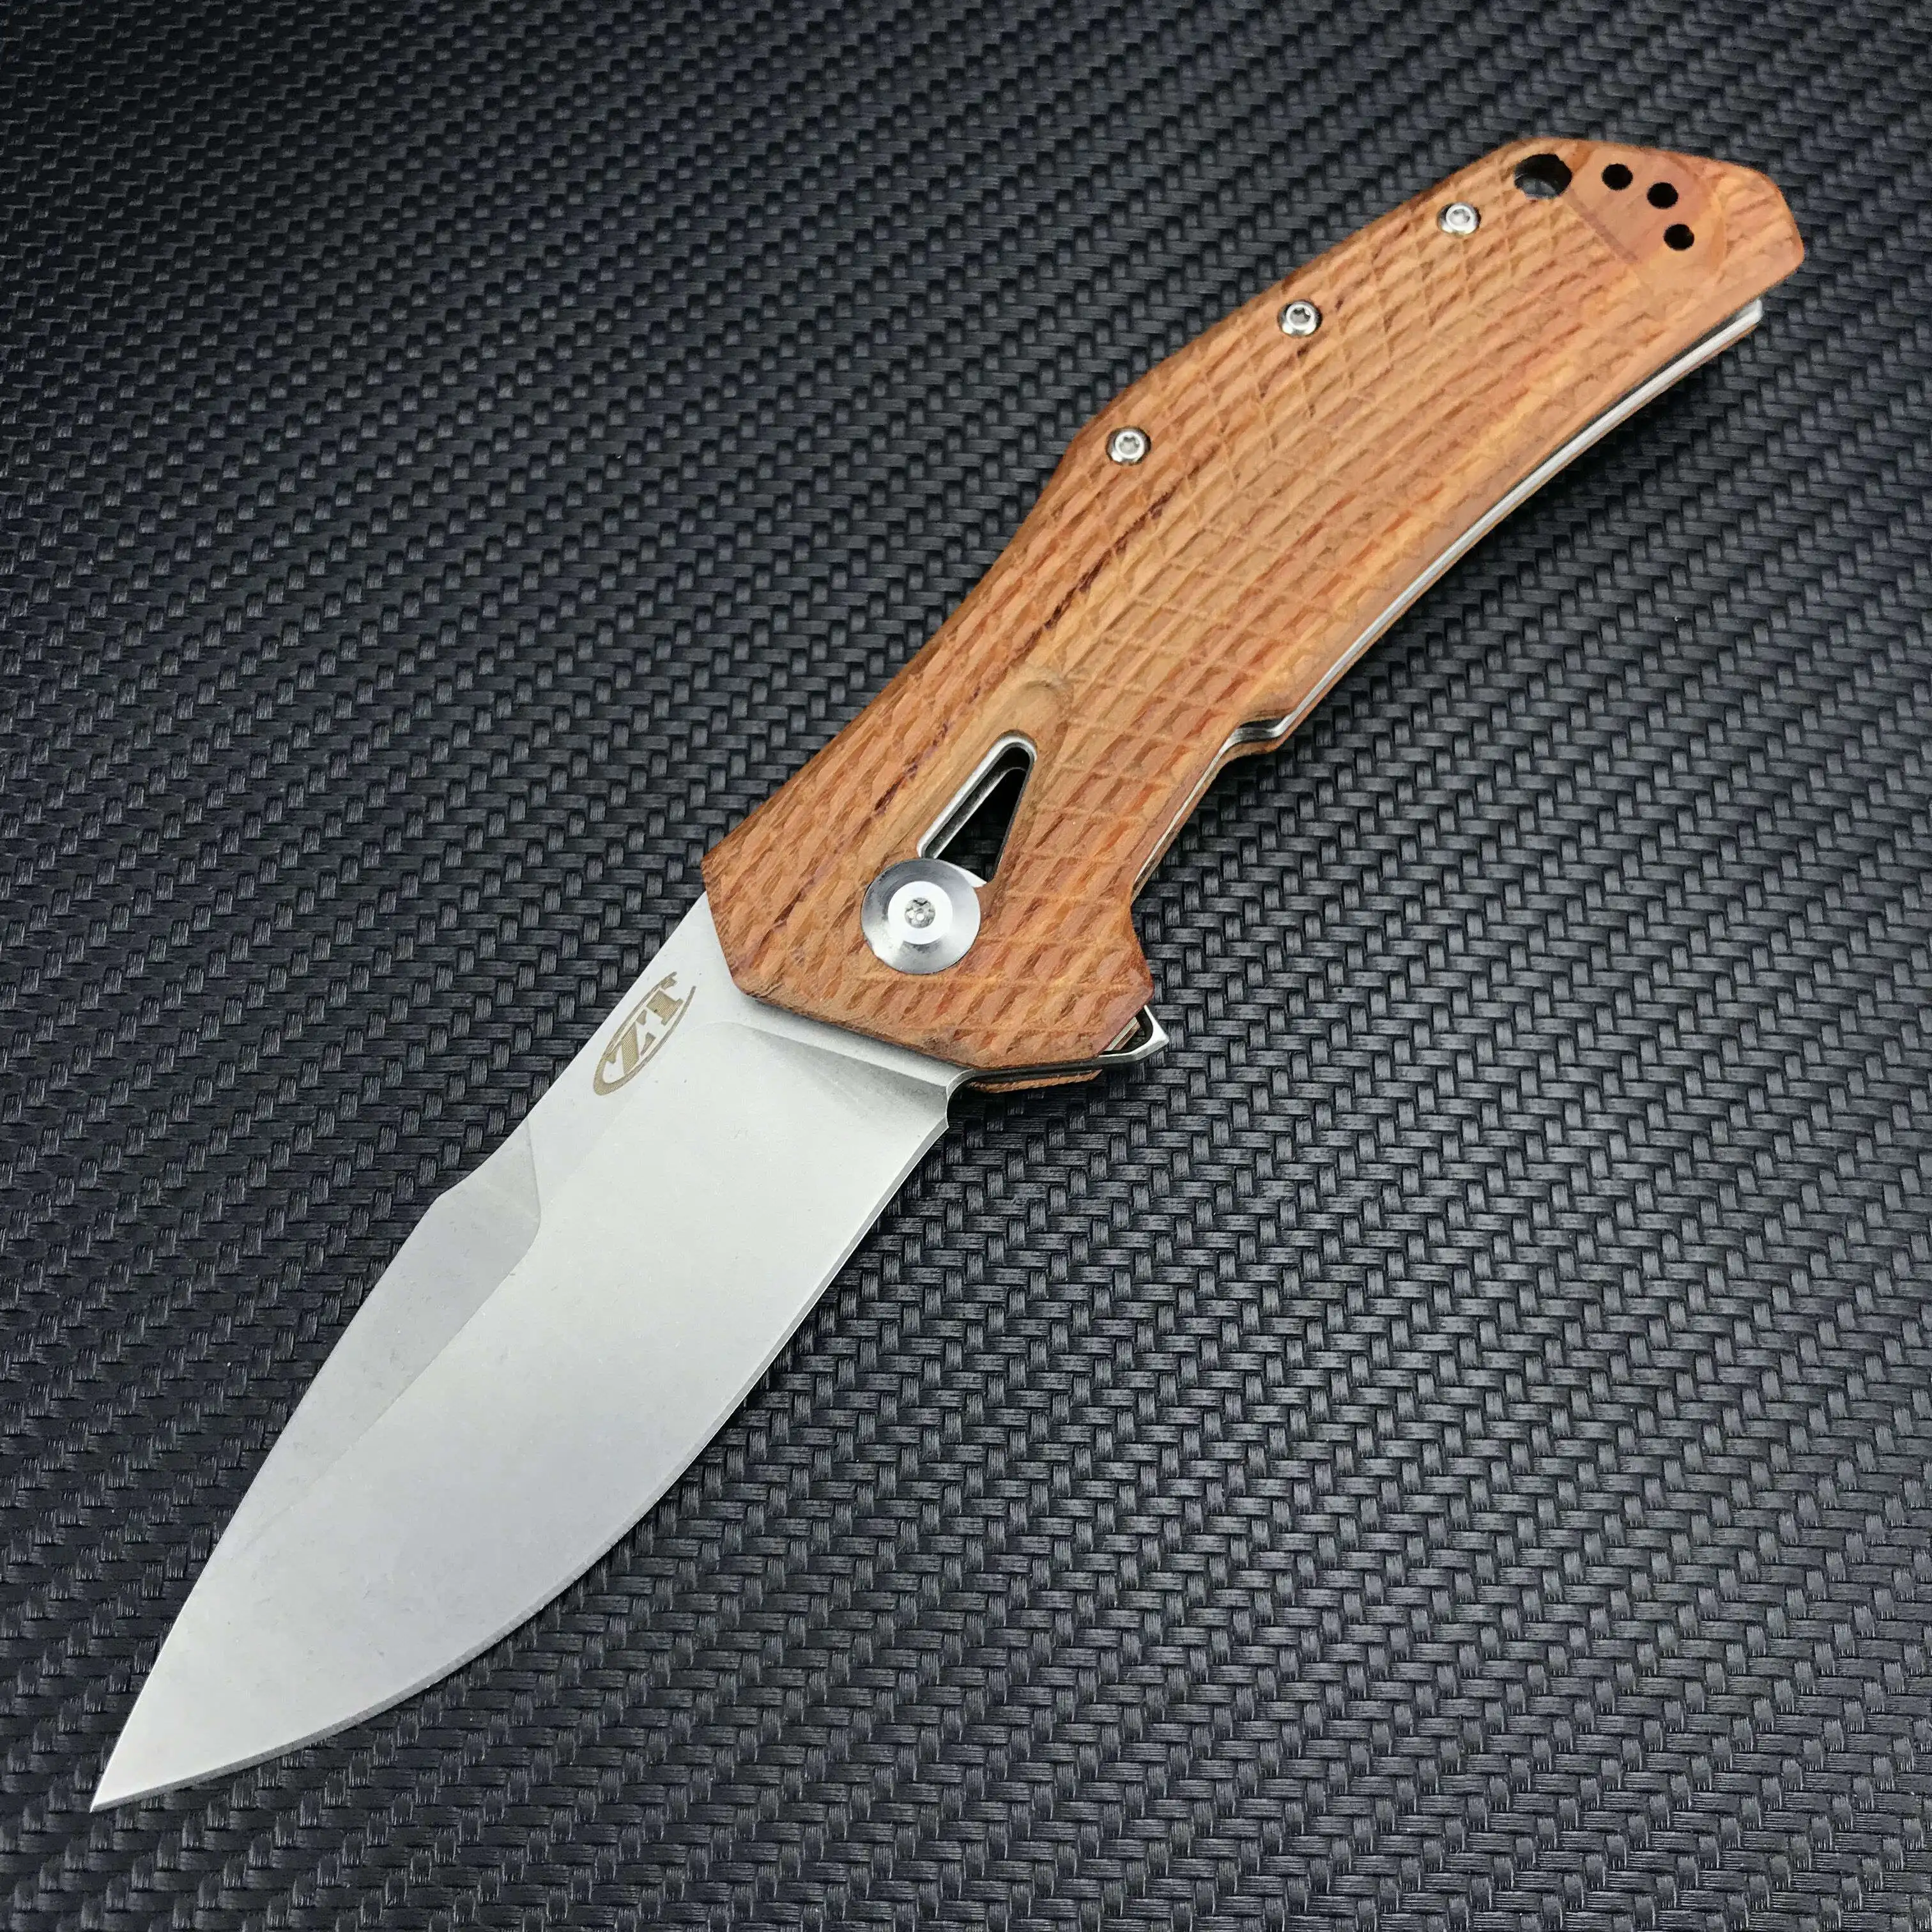 

2022 New Zero Tolerance 0308 Flipper Knife 3.75" CPM-20CV Stonewashed Blade, Coyote Tan G10 and Titanium Handles Tactical knife